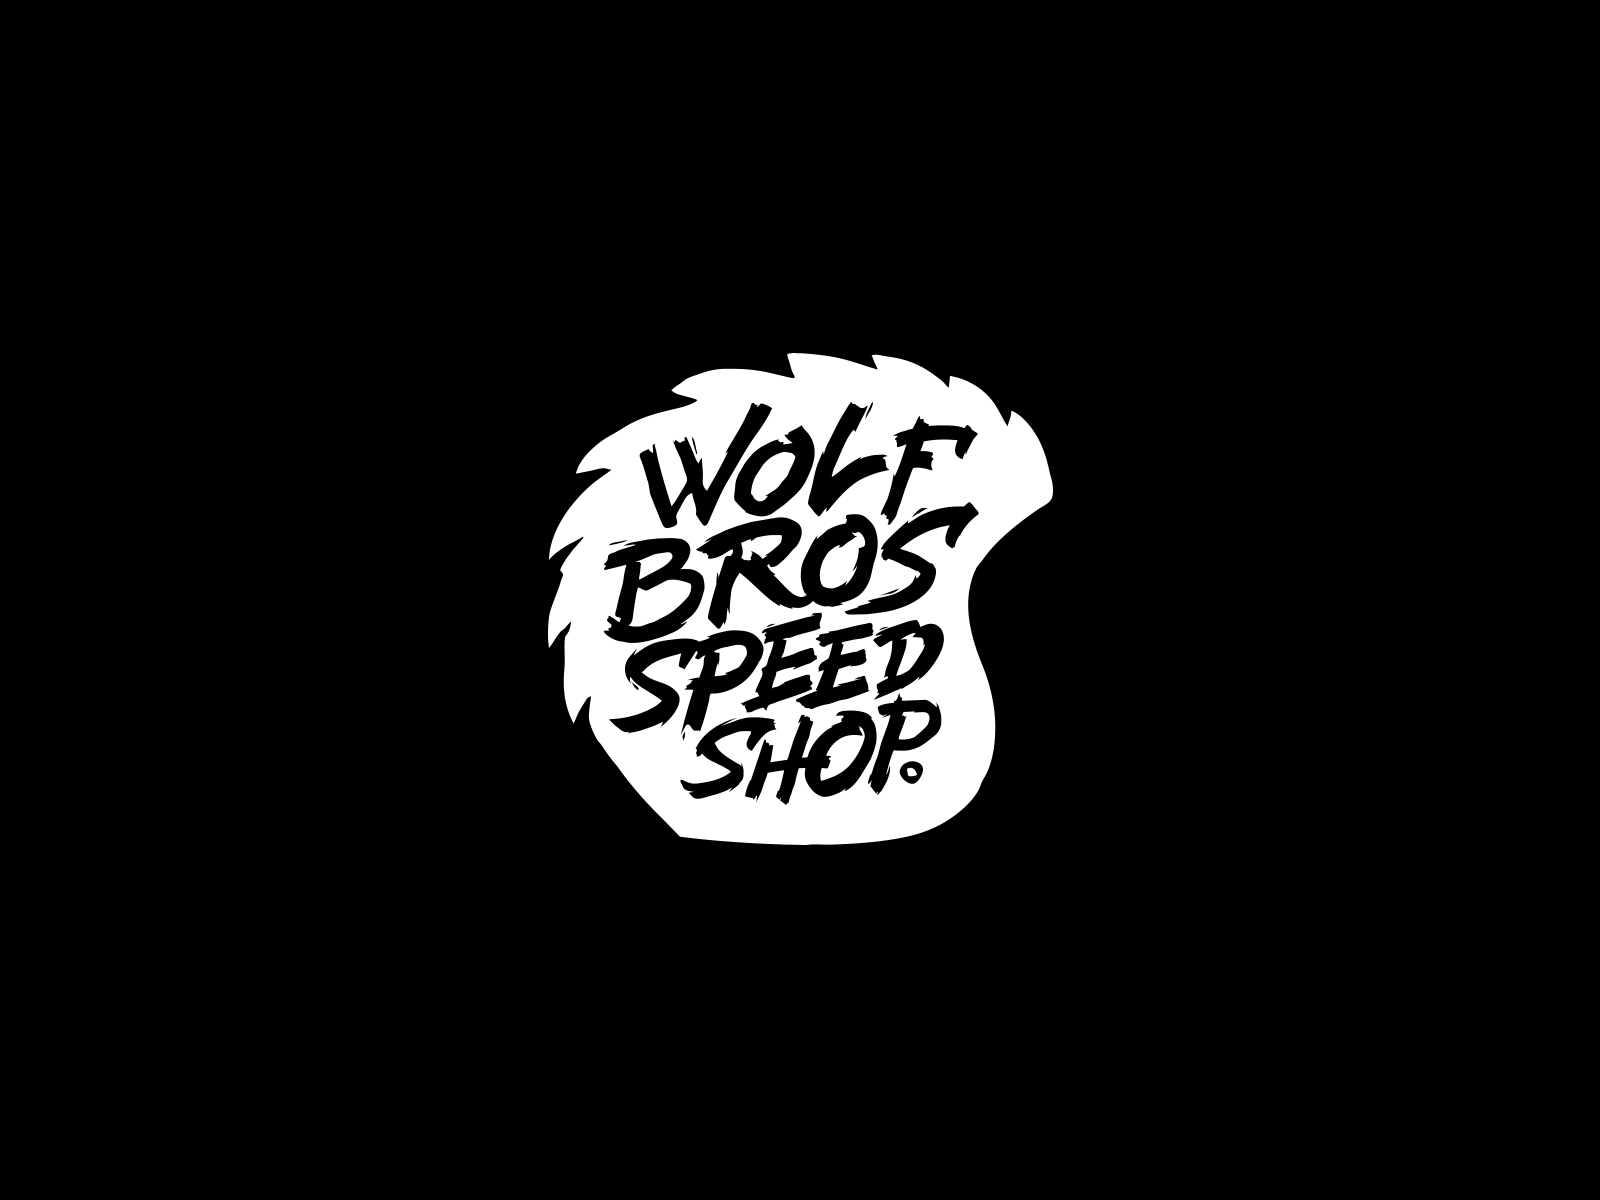 Wolfbros Cafe animation branding calligraphy design illustration lettering logo type visual identity